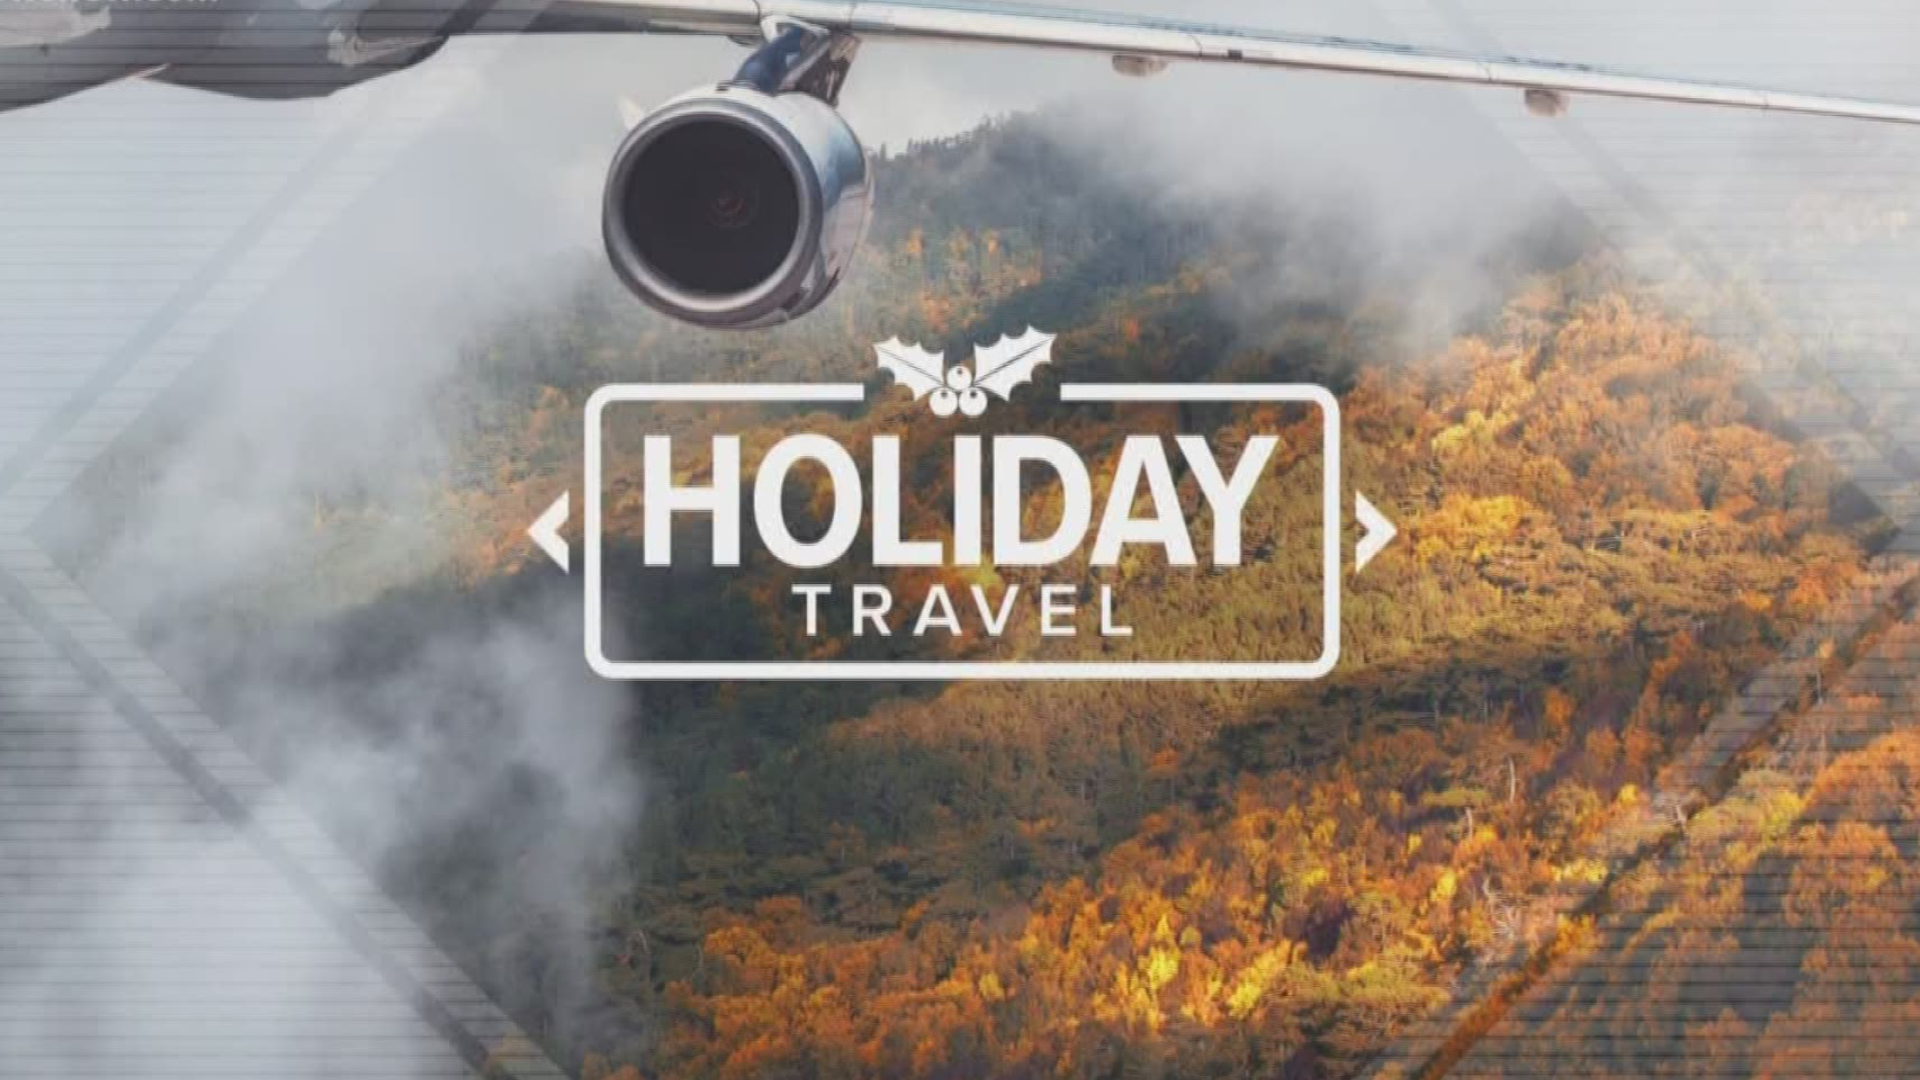 More than 54-million people are predicted to be traveling more than 50 miles this Thanksgiving.